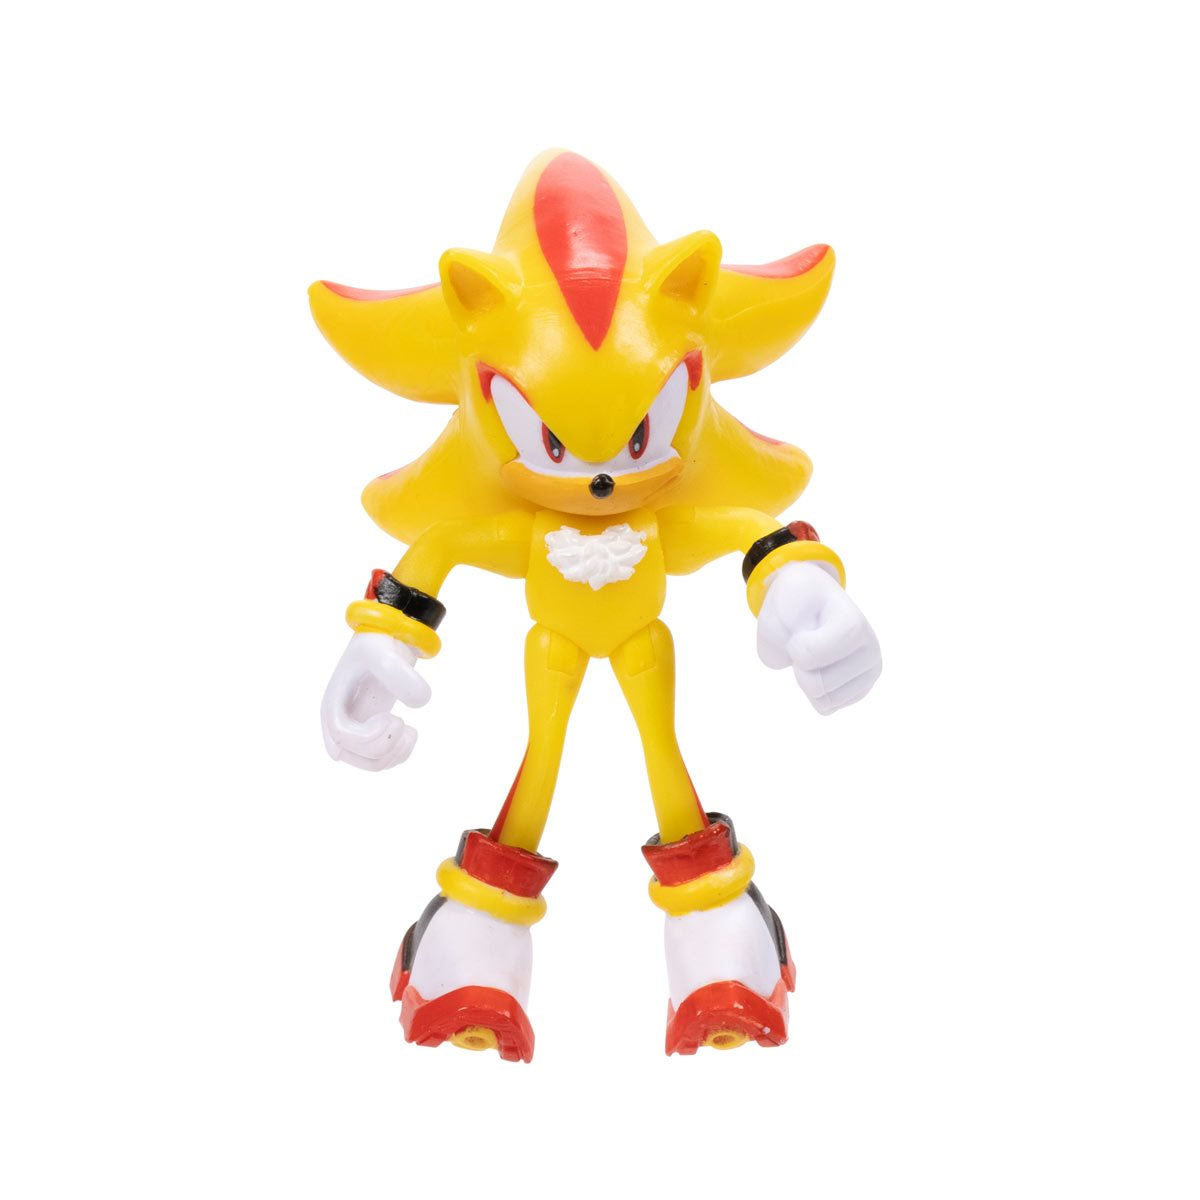 Sonic the Hedgehog Super Sonic 2 1/2 Inch Wave 7 Action Figure – Insert  Coin Toys